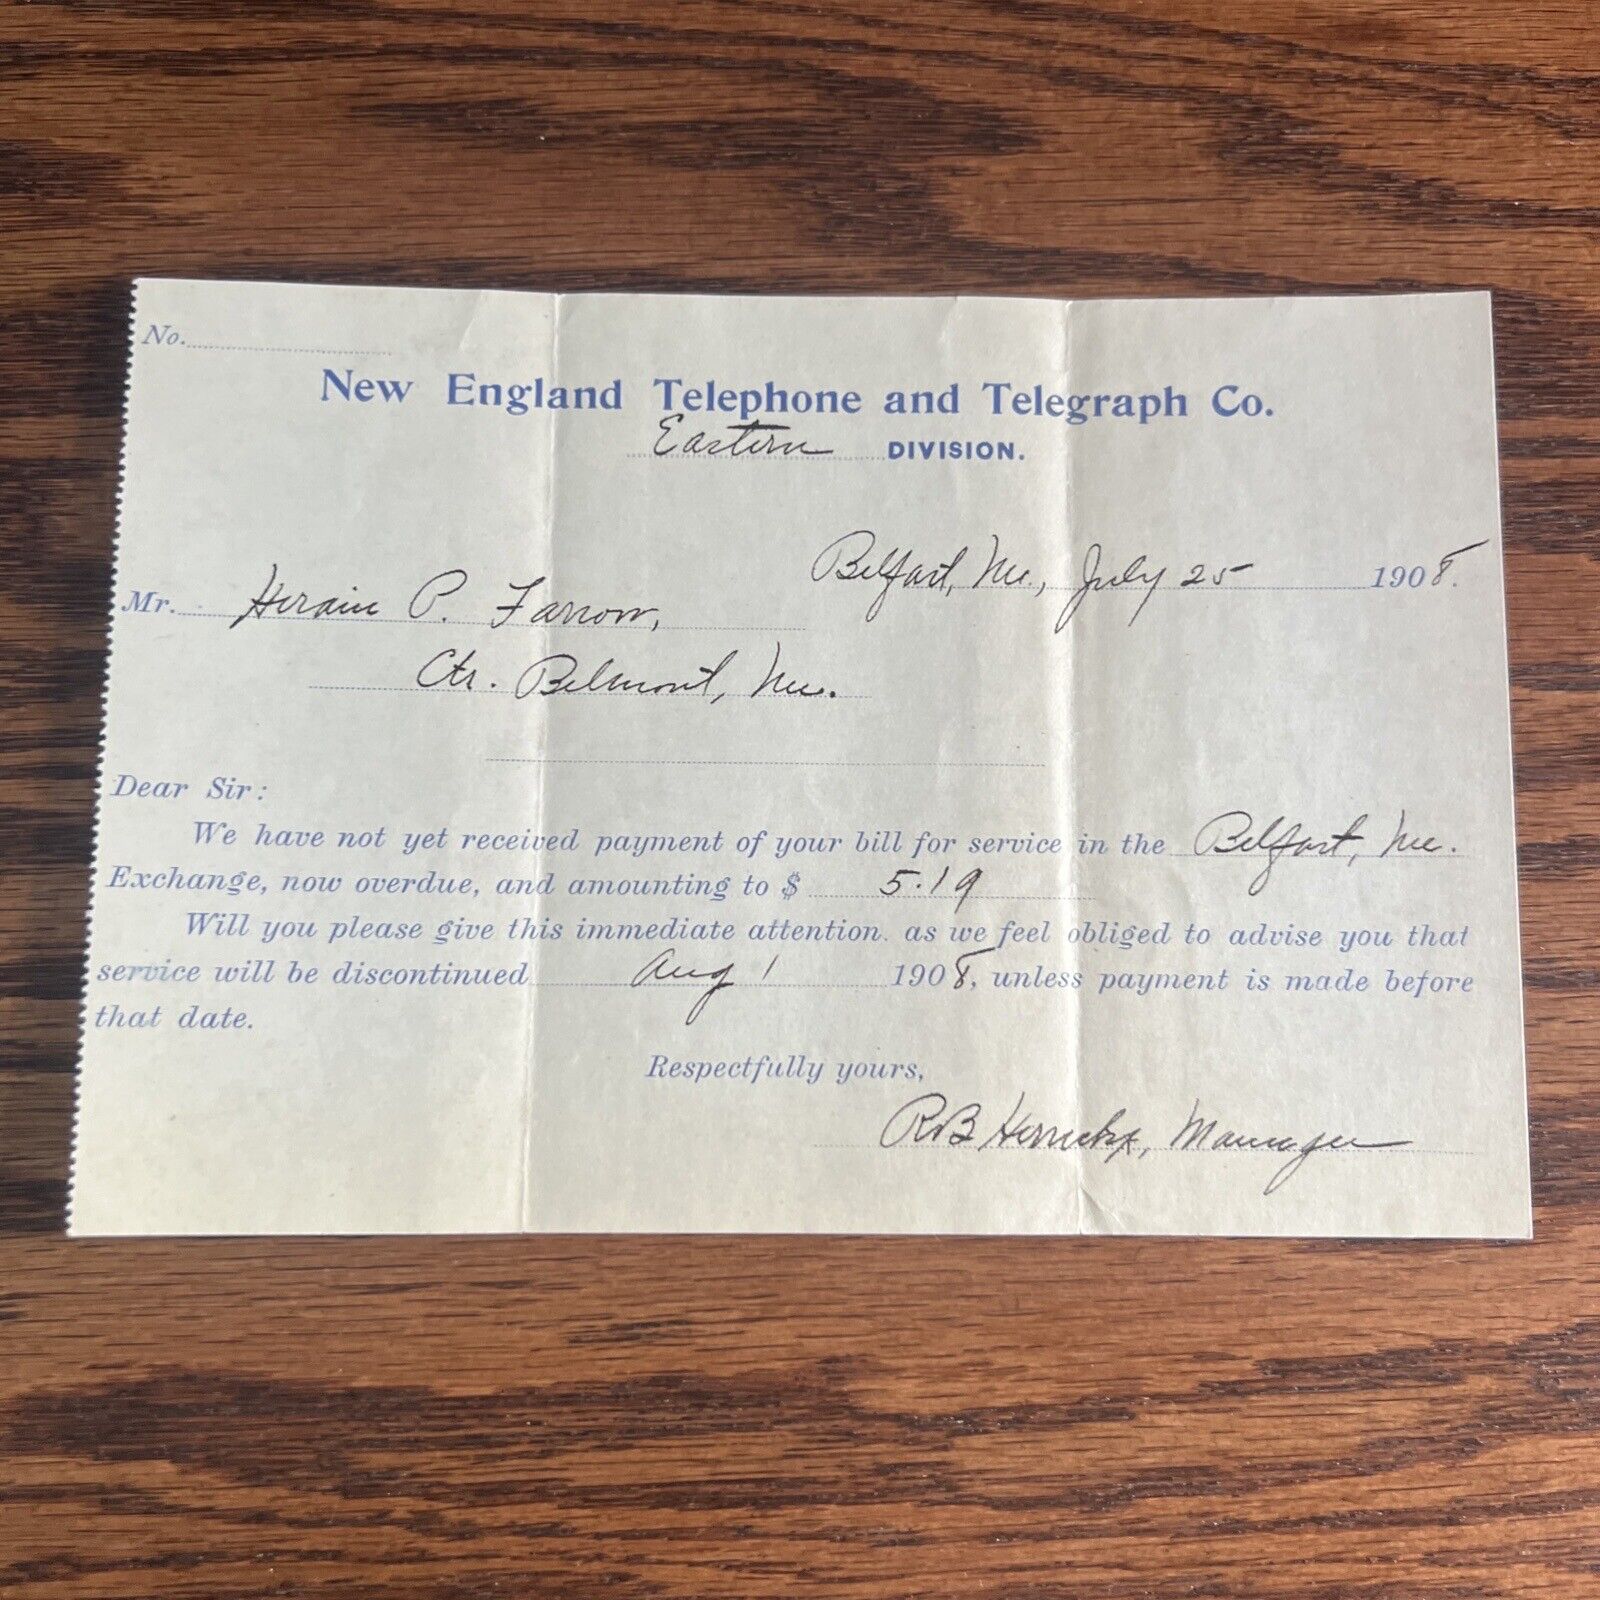 Overdue Bill And Settlement 1908 - New England Telephone And Telegraph Co